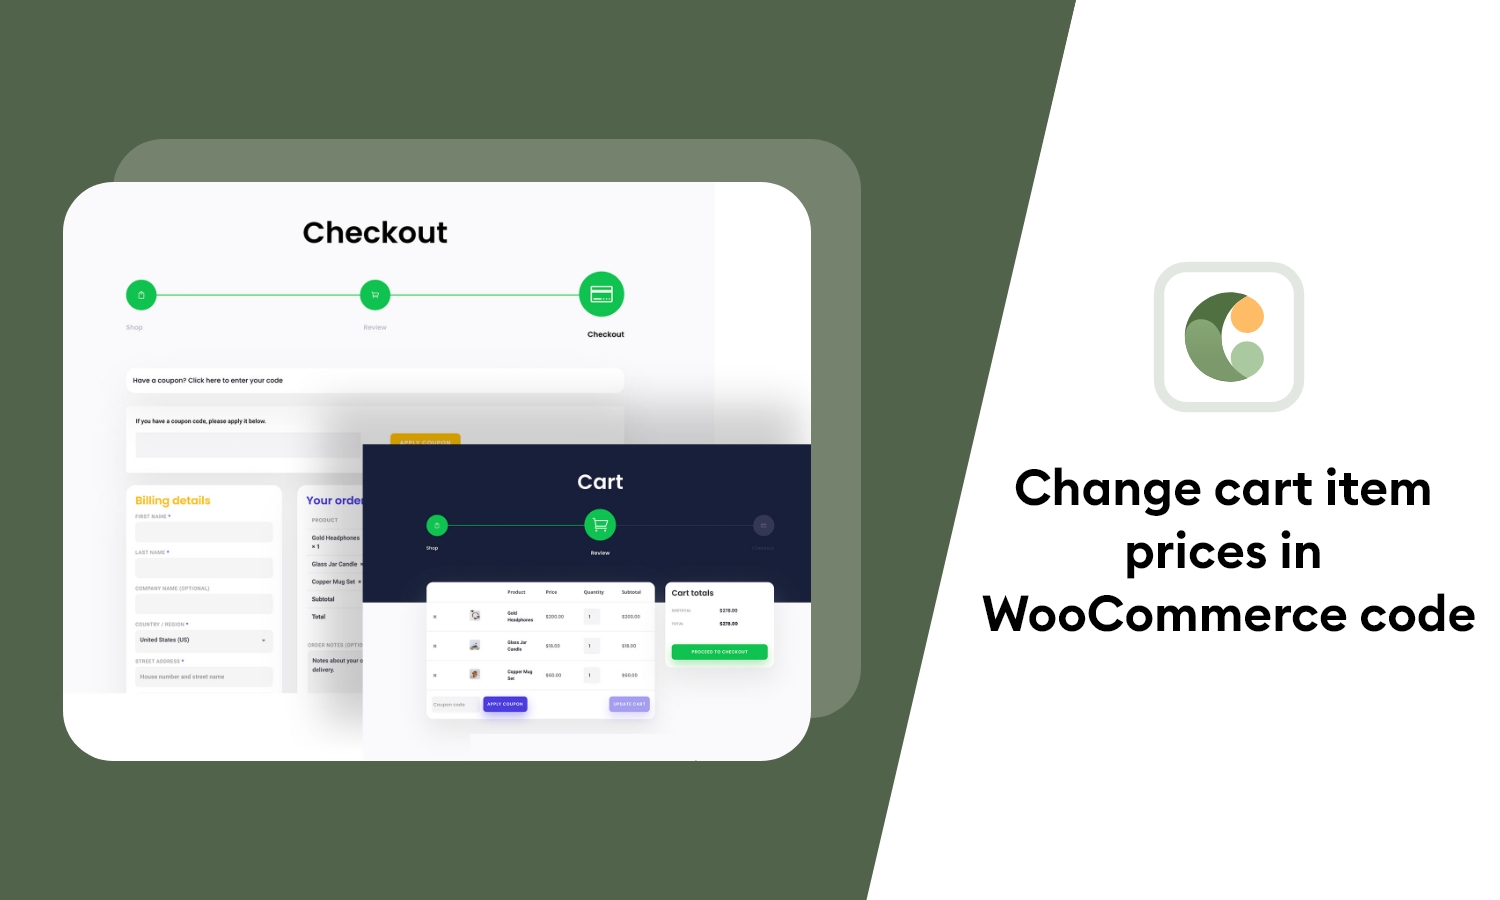 Change cart item prices in WooCommerce code